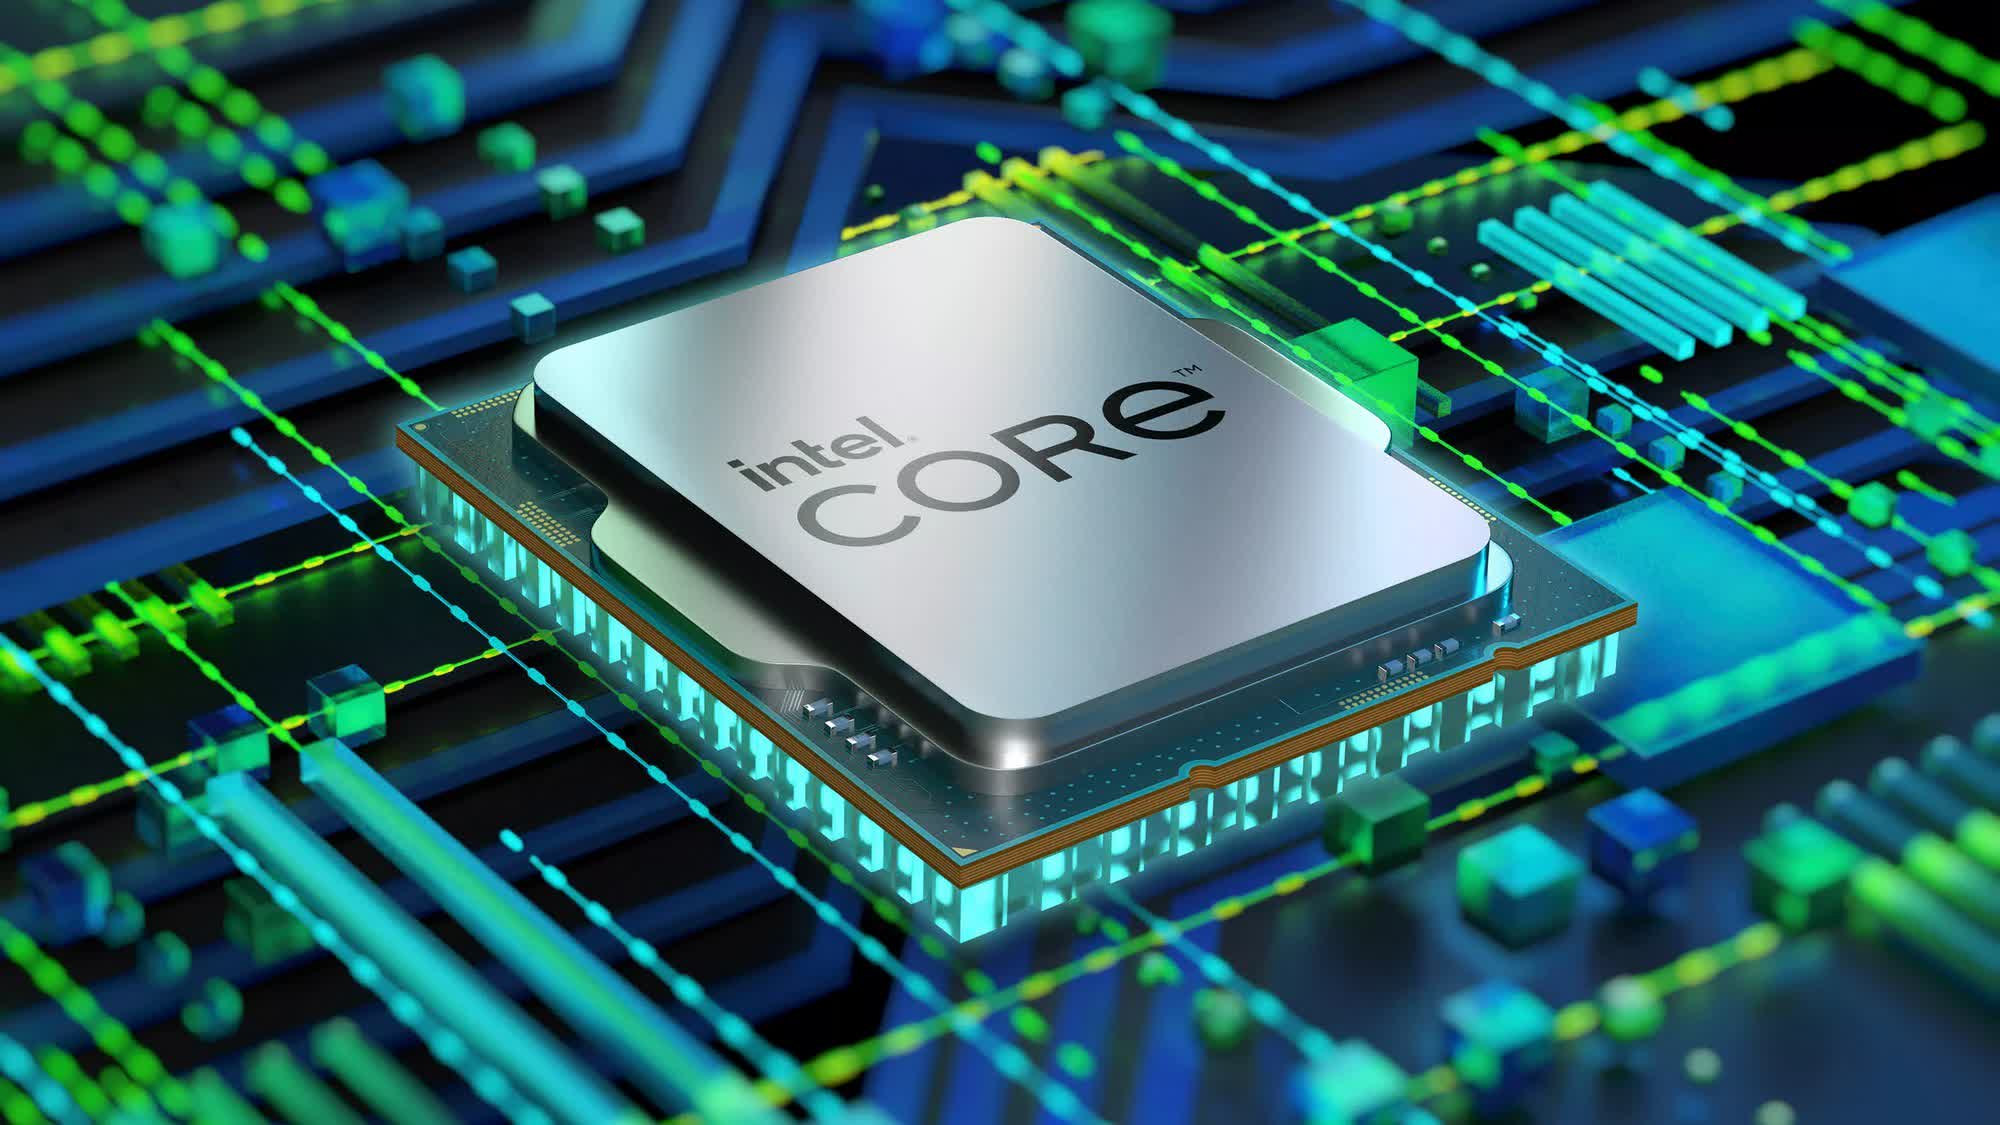 Dual-core Intel 300 CPU disappointing benchmarks prove modern games need more cores